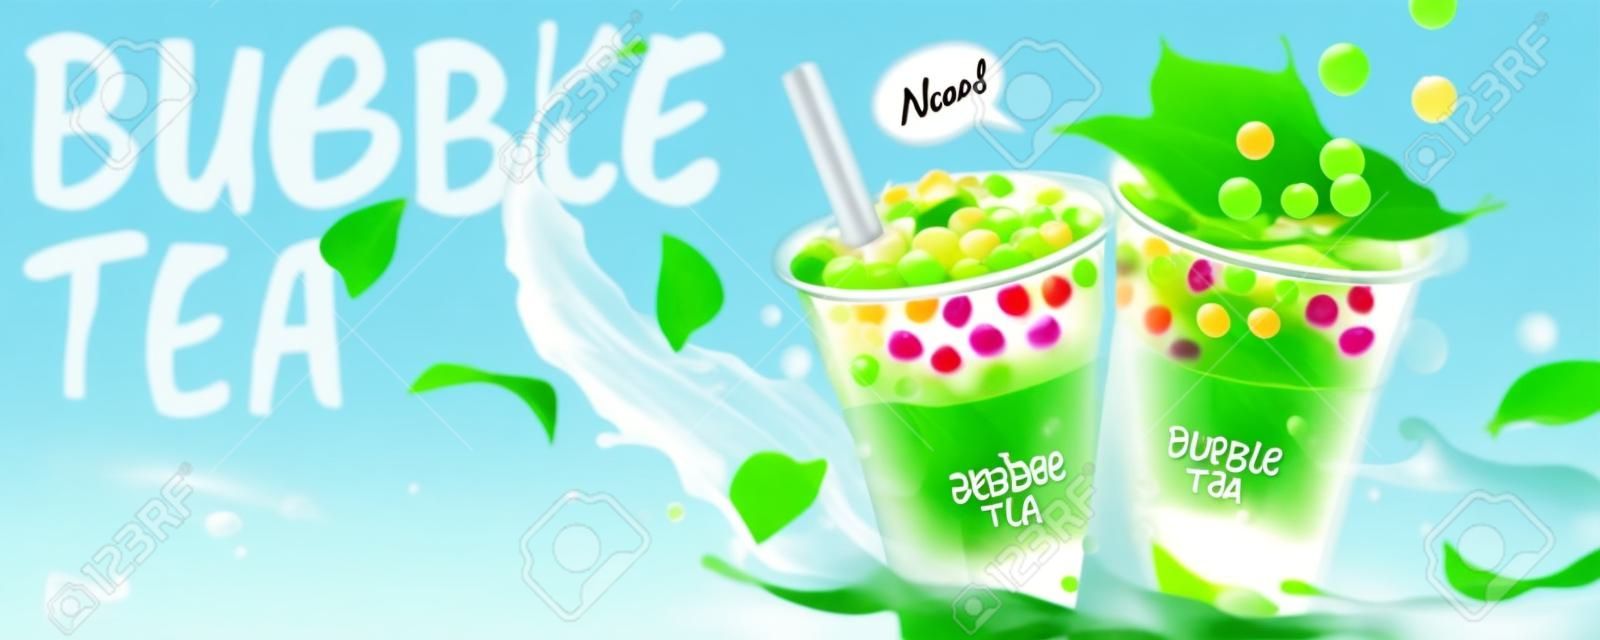 Bubble tea banner ads with splashing milk and green leaves, 3d illustration